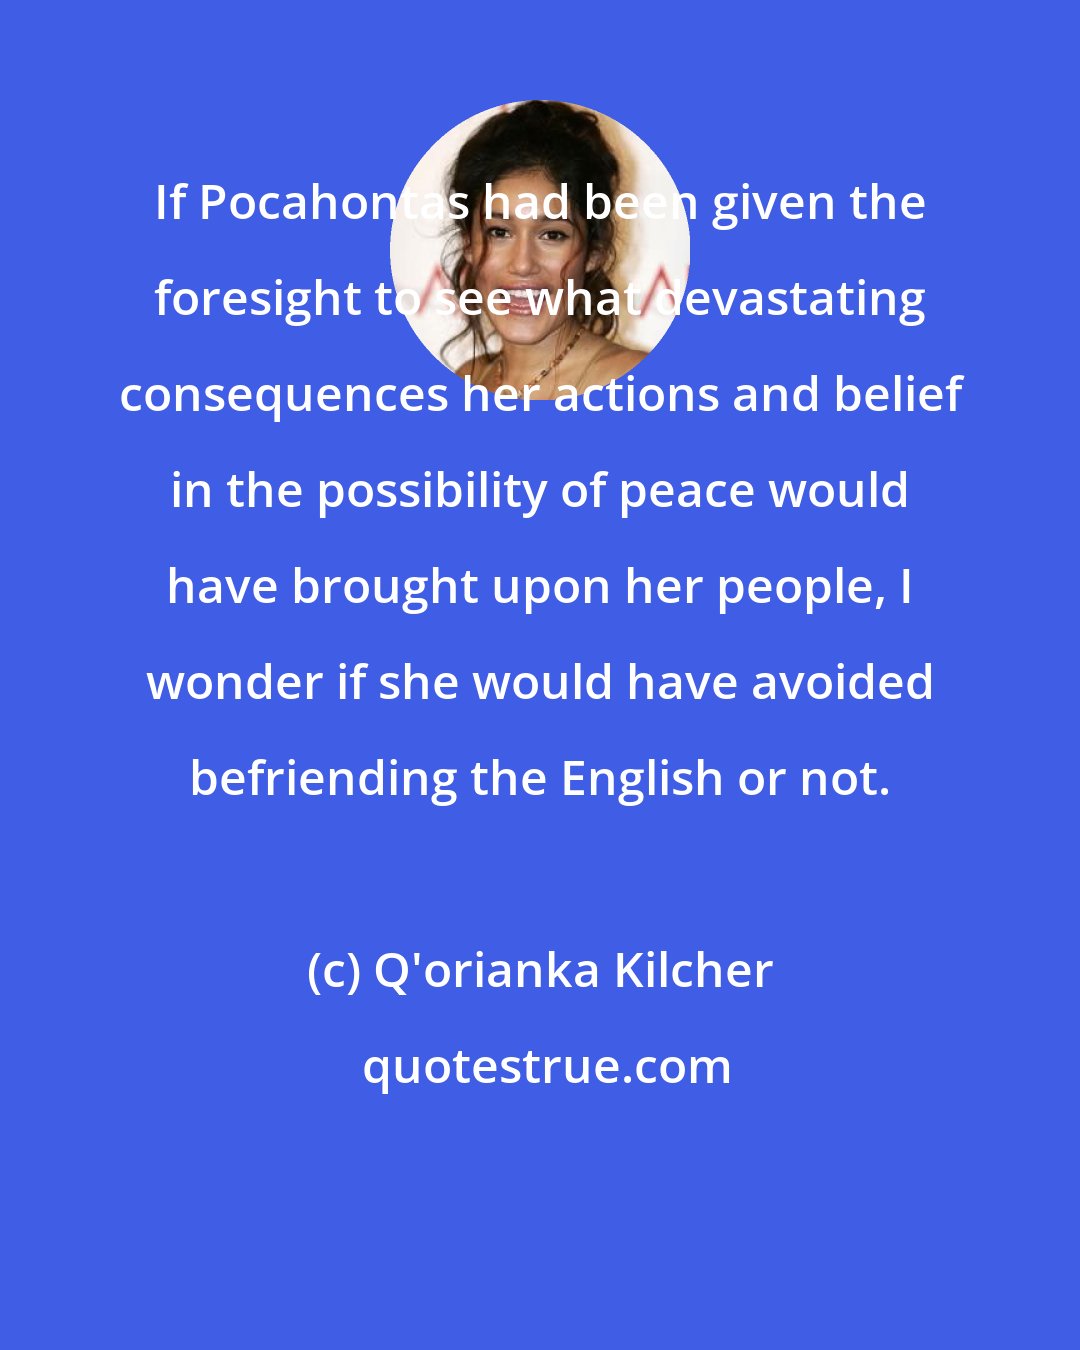 Q'orianka Kilcher: If Pocahontas had been given the foresight to see what devastating consequences her actions and belief in the possibility of peace would have brought upon her people, I wonder if she would have avoided befriending the English or not.